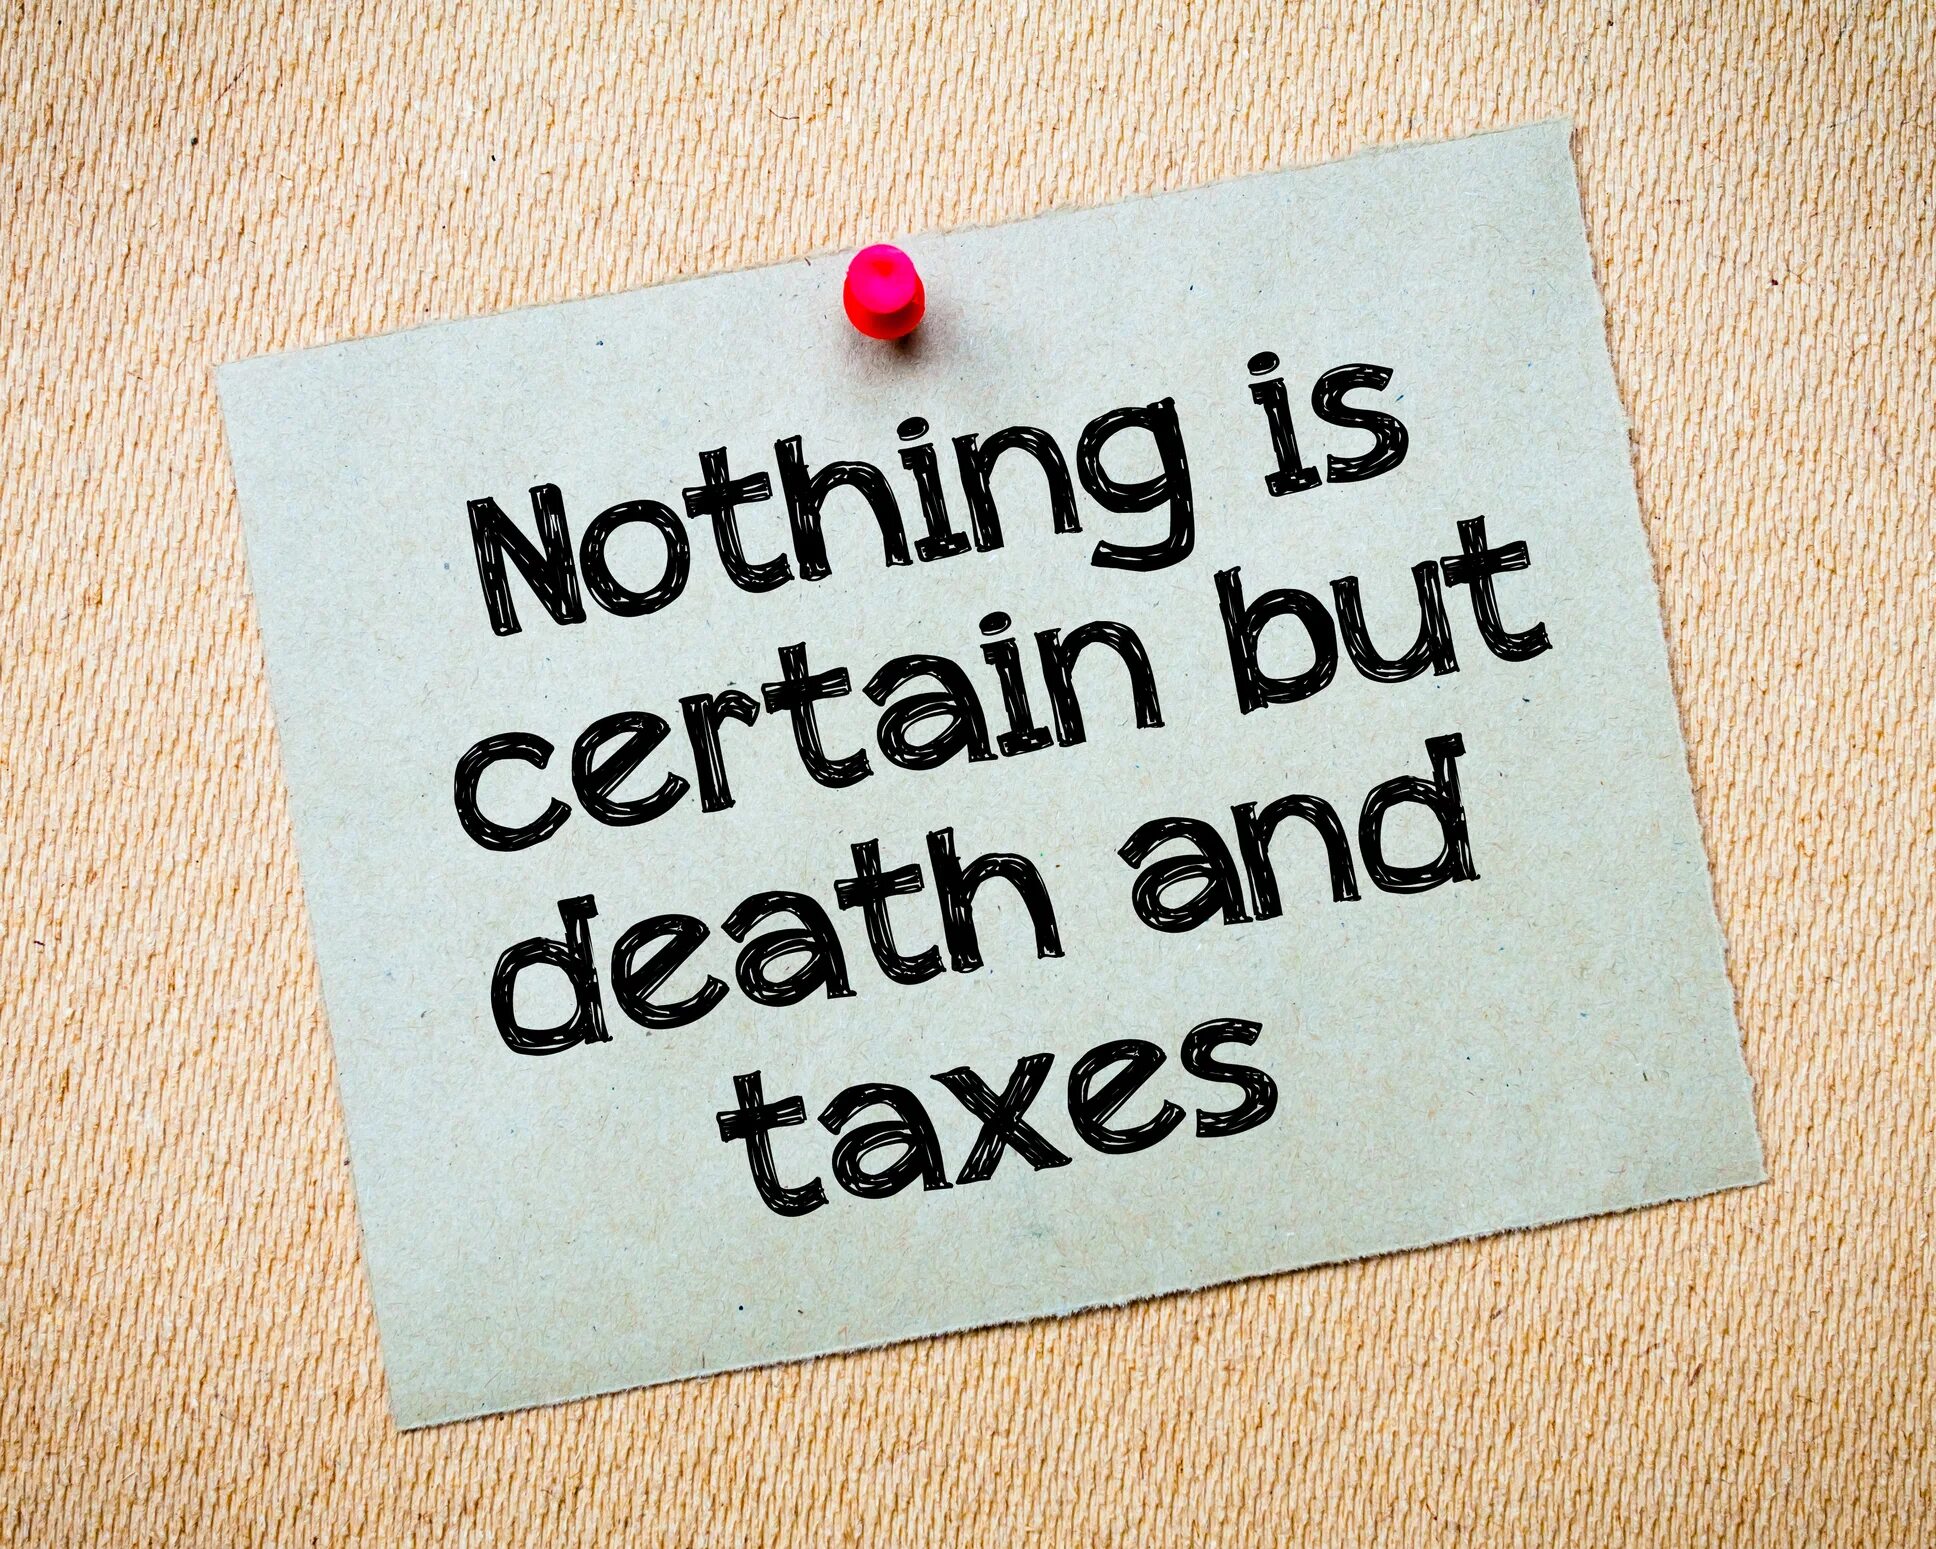 The world is nothing. Death and Taxes. Certain. Certain перевод. Death and Taxes от placeholder.